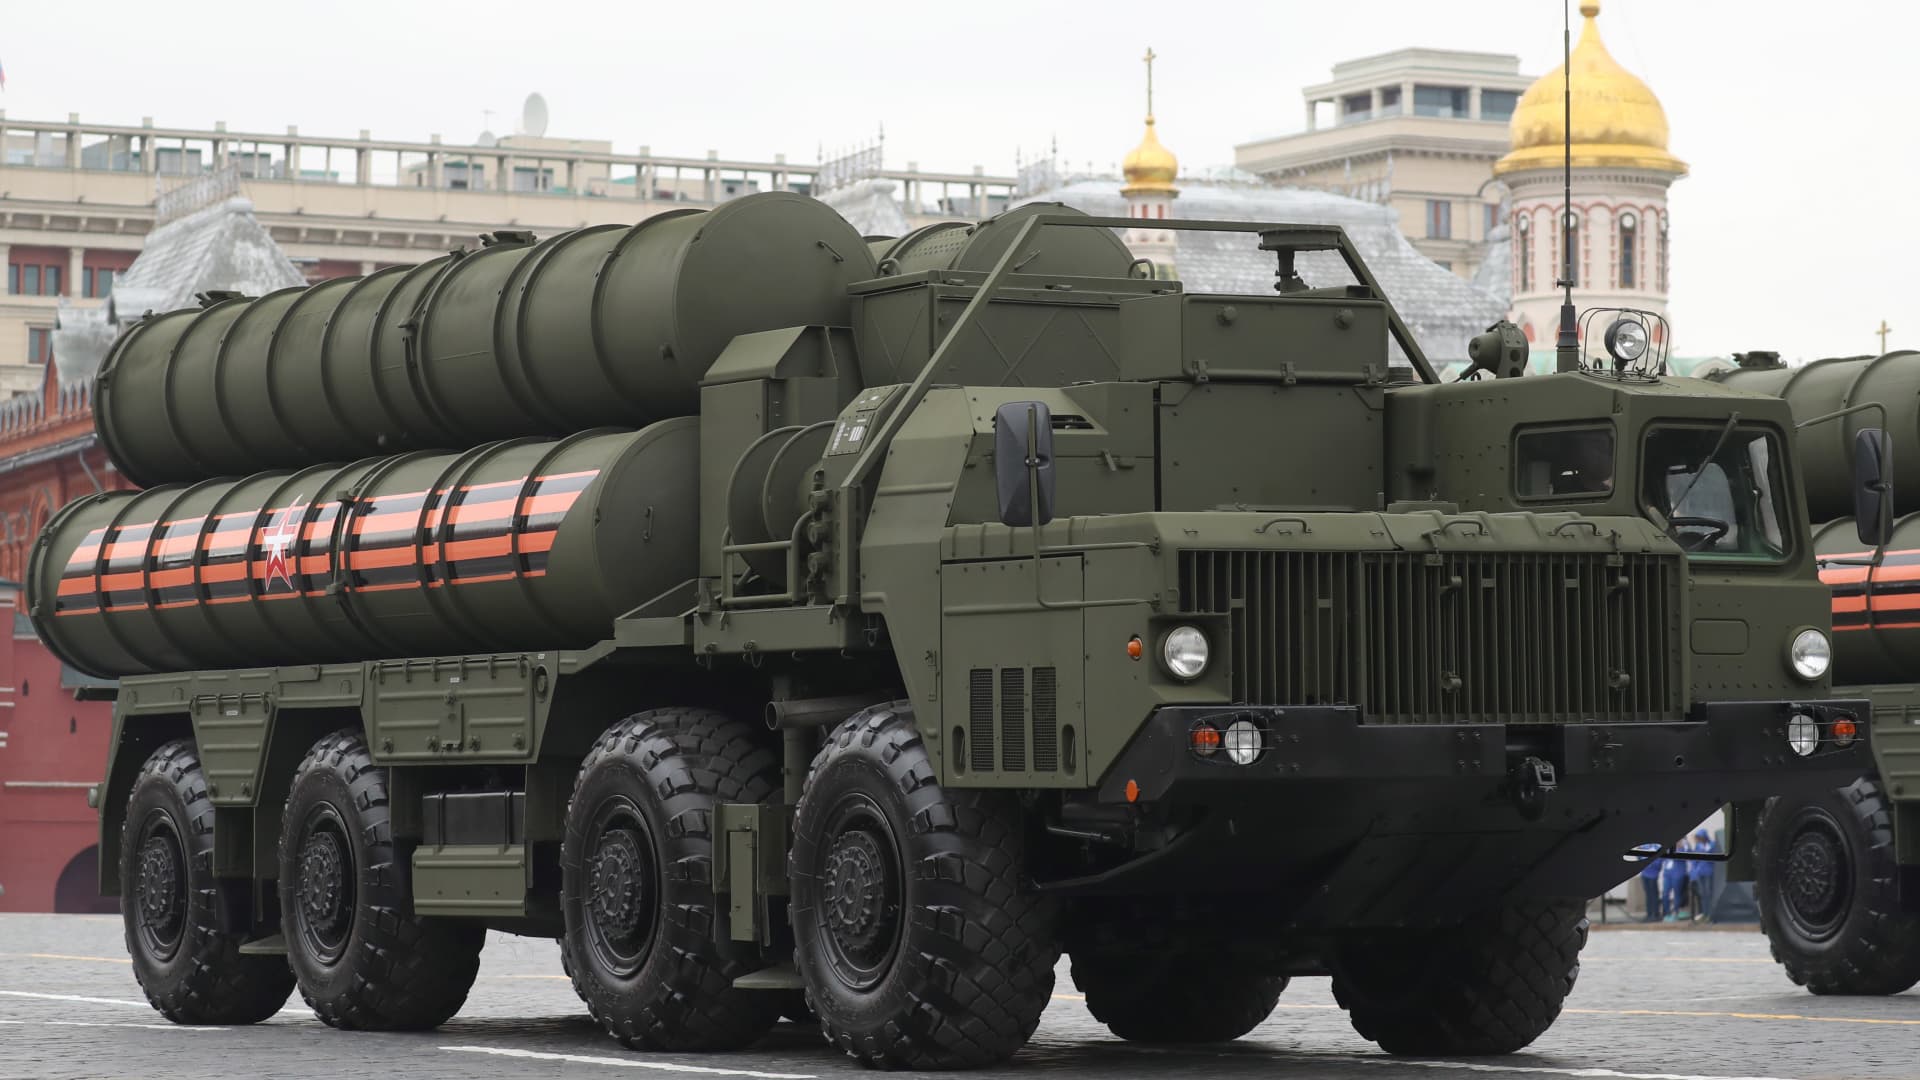 An S-400 Triumf surface-to-air missile system seen in Moscow.